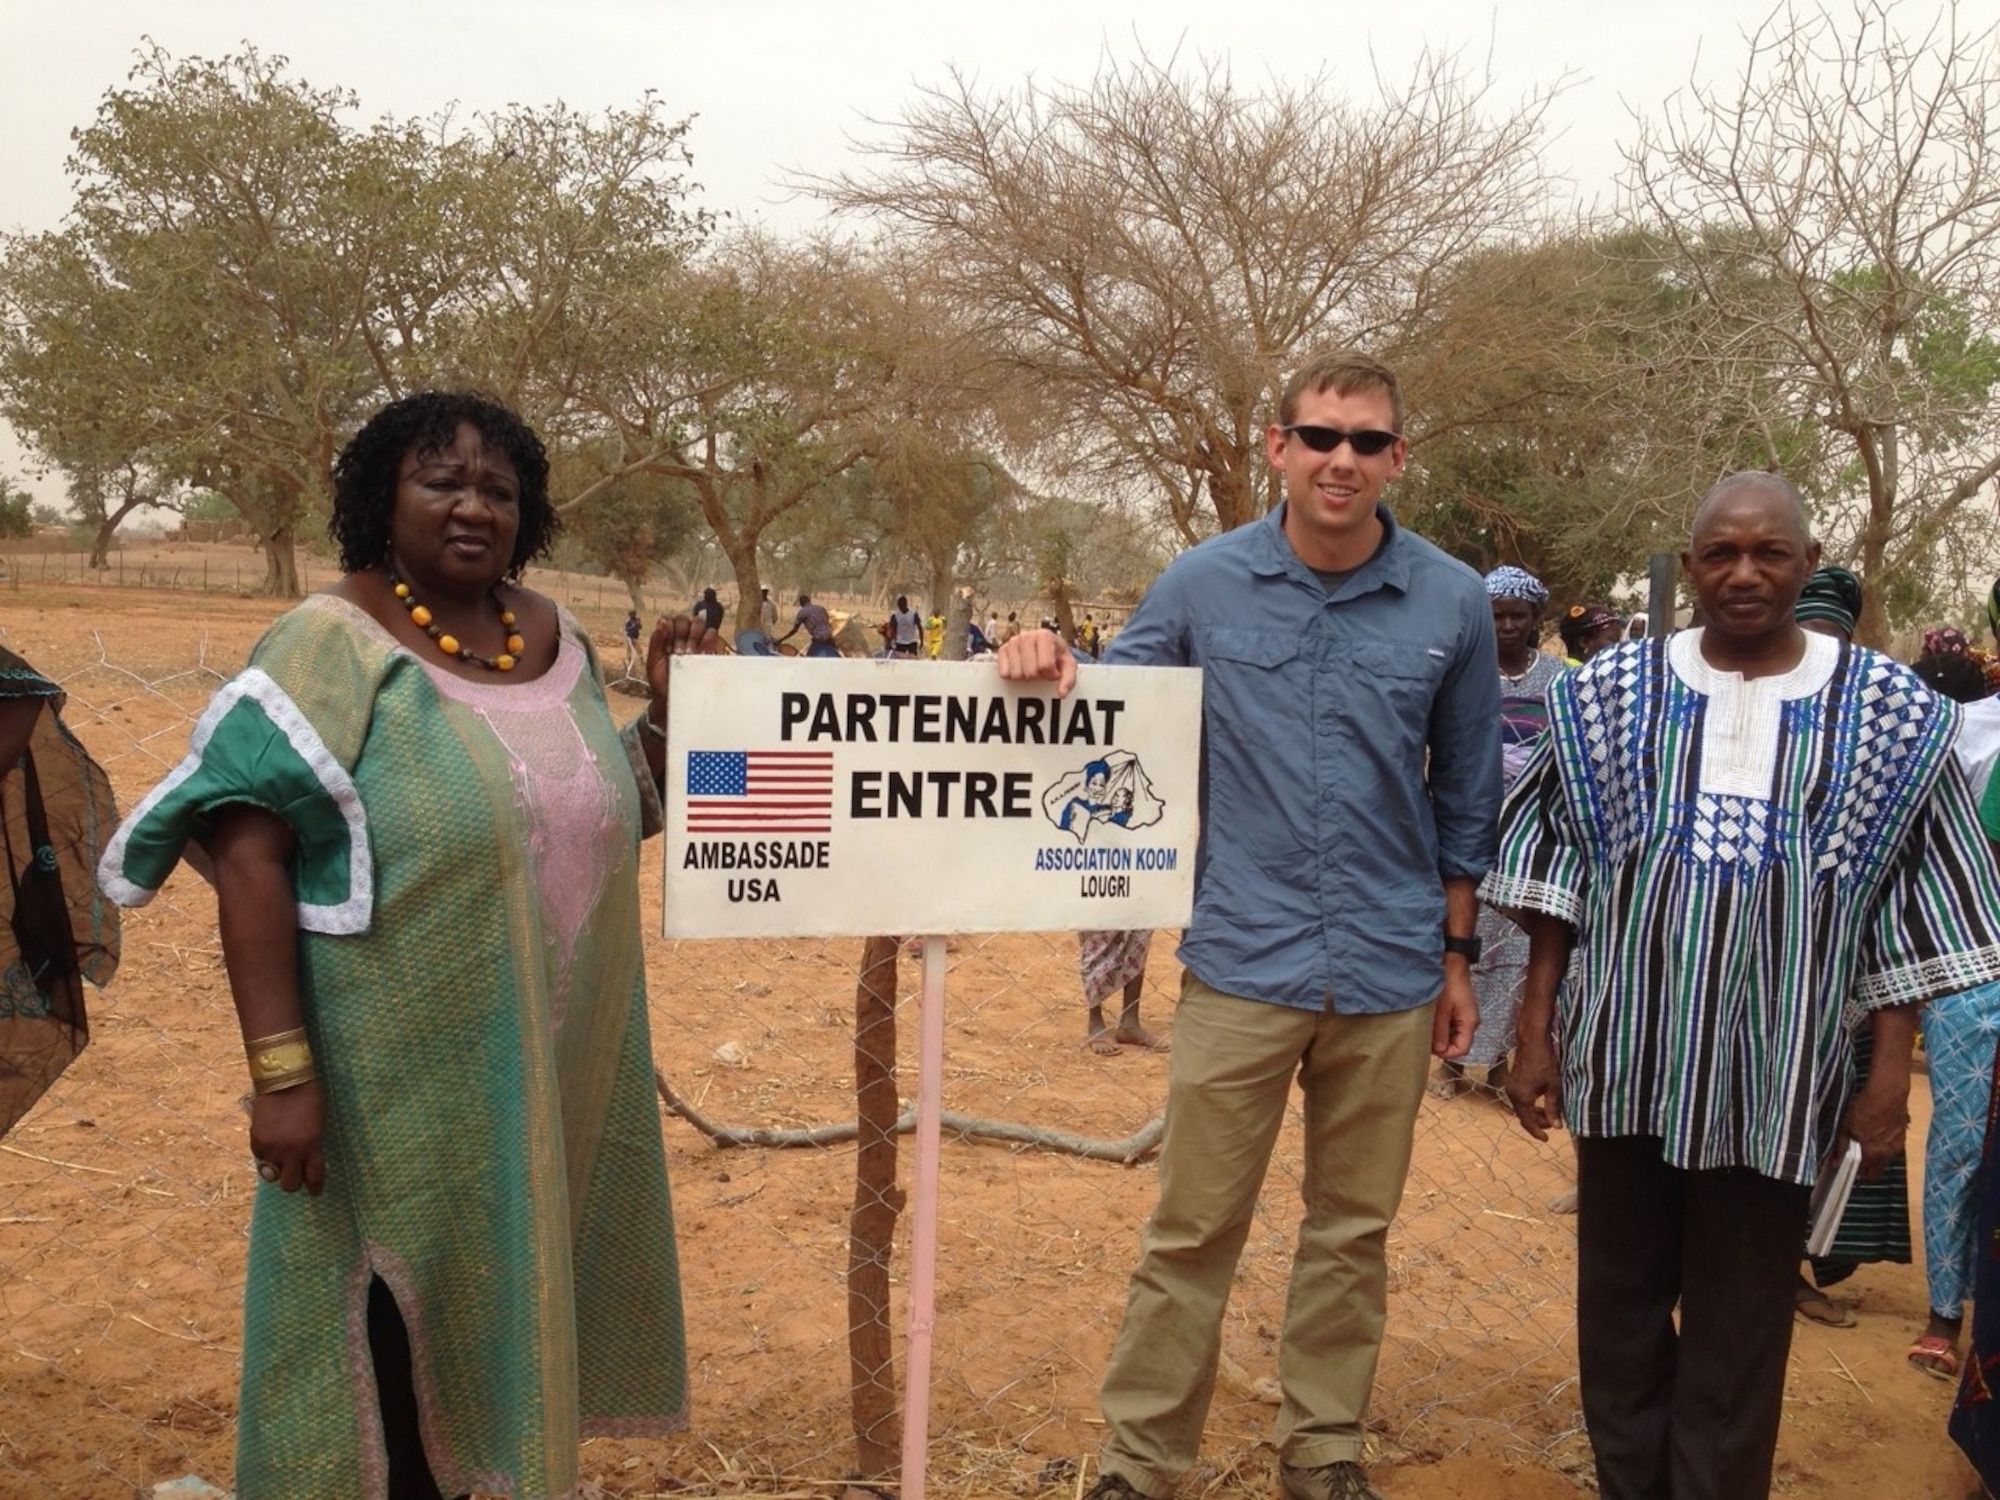 During a deployment in Burkina Faso, French Language Enabled Airman Program Scholar Maj. James Beard helped with an Embassy program to provide a well in a village. (Courtesy photo)